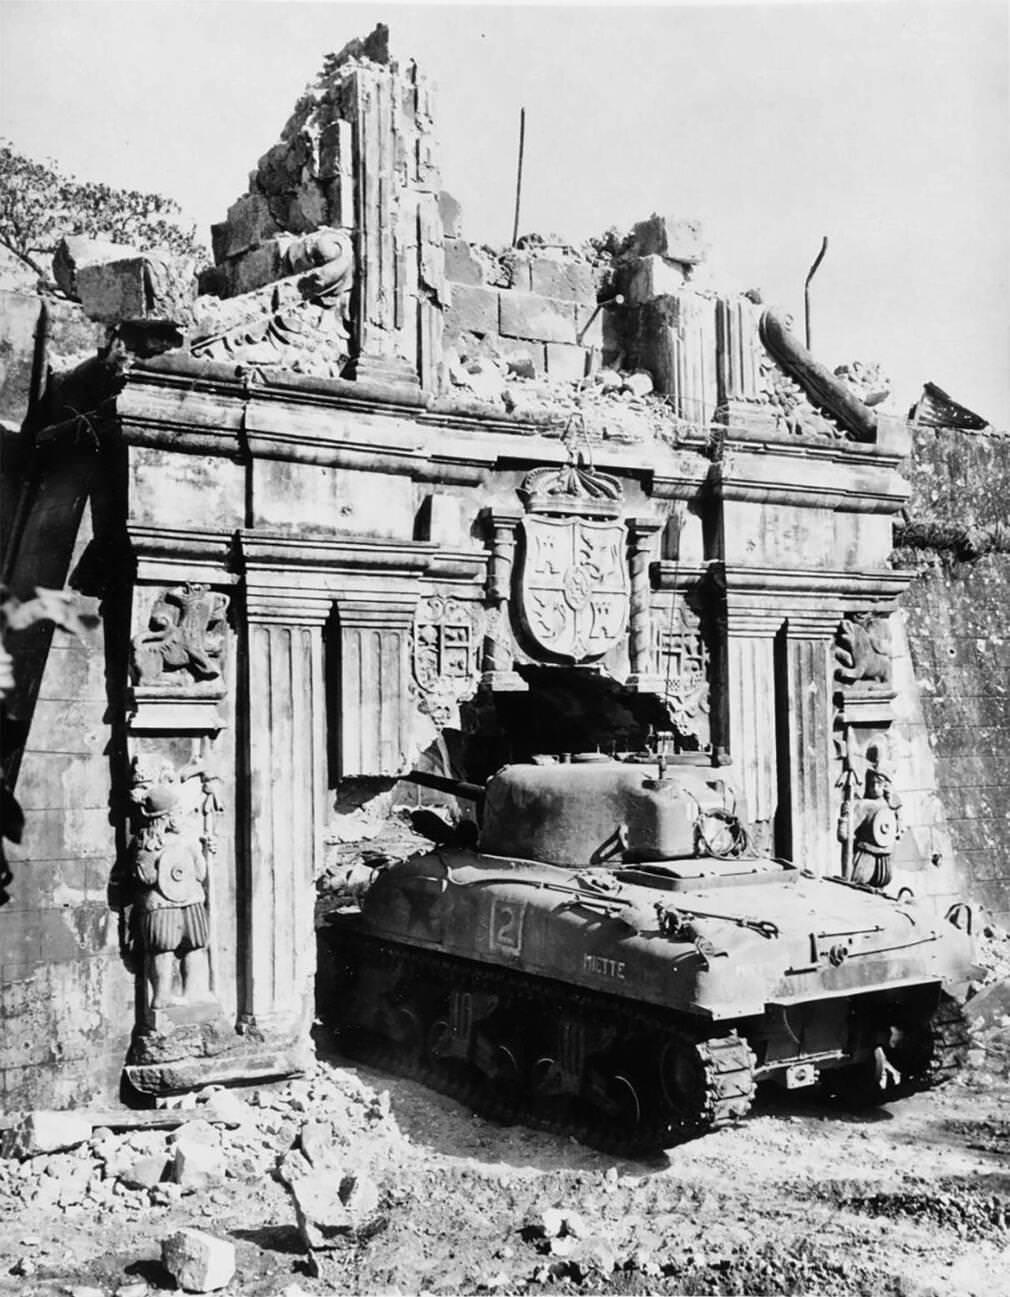 A U.S. Army M4 Sherman tank enters Fort Santiago through an enlarged gate during the Battle of Manila, 1945.